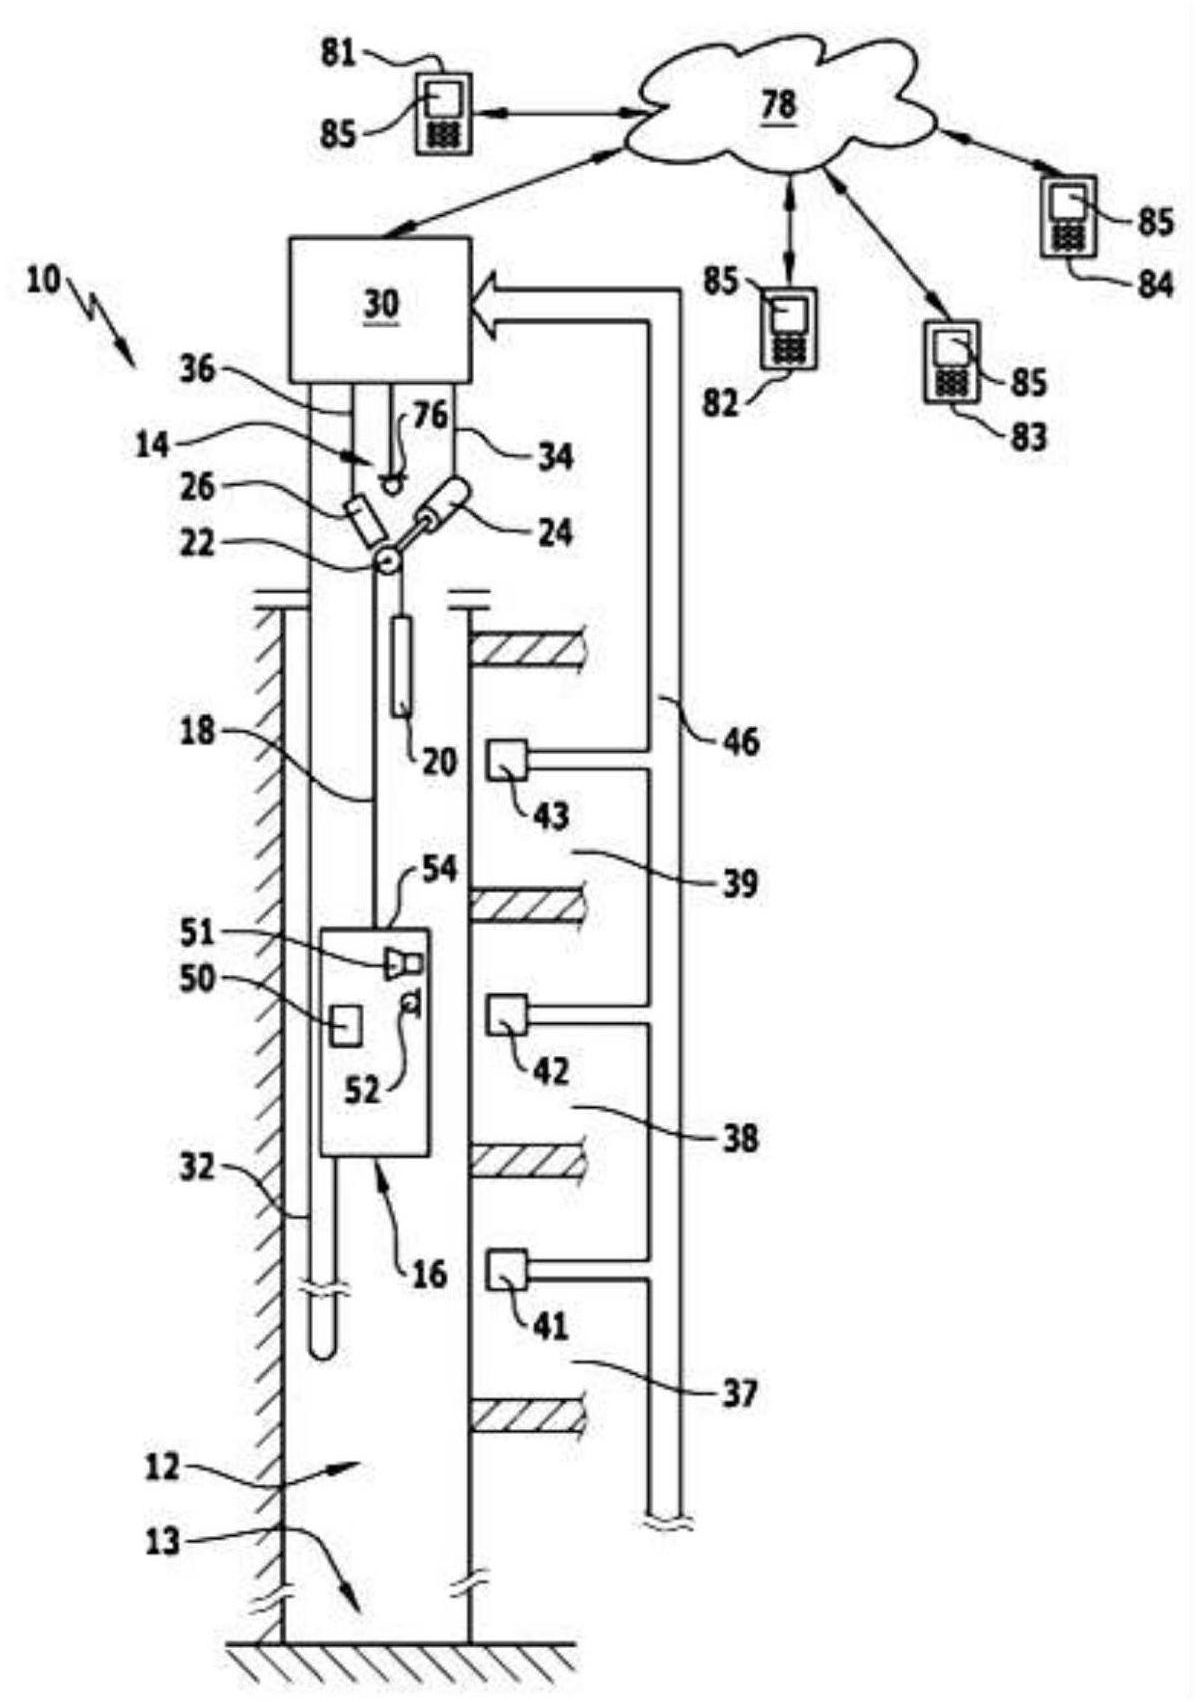 Method for remotely diagnosing an elevator system and elevator system for performing the method